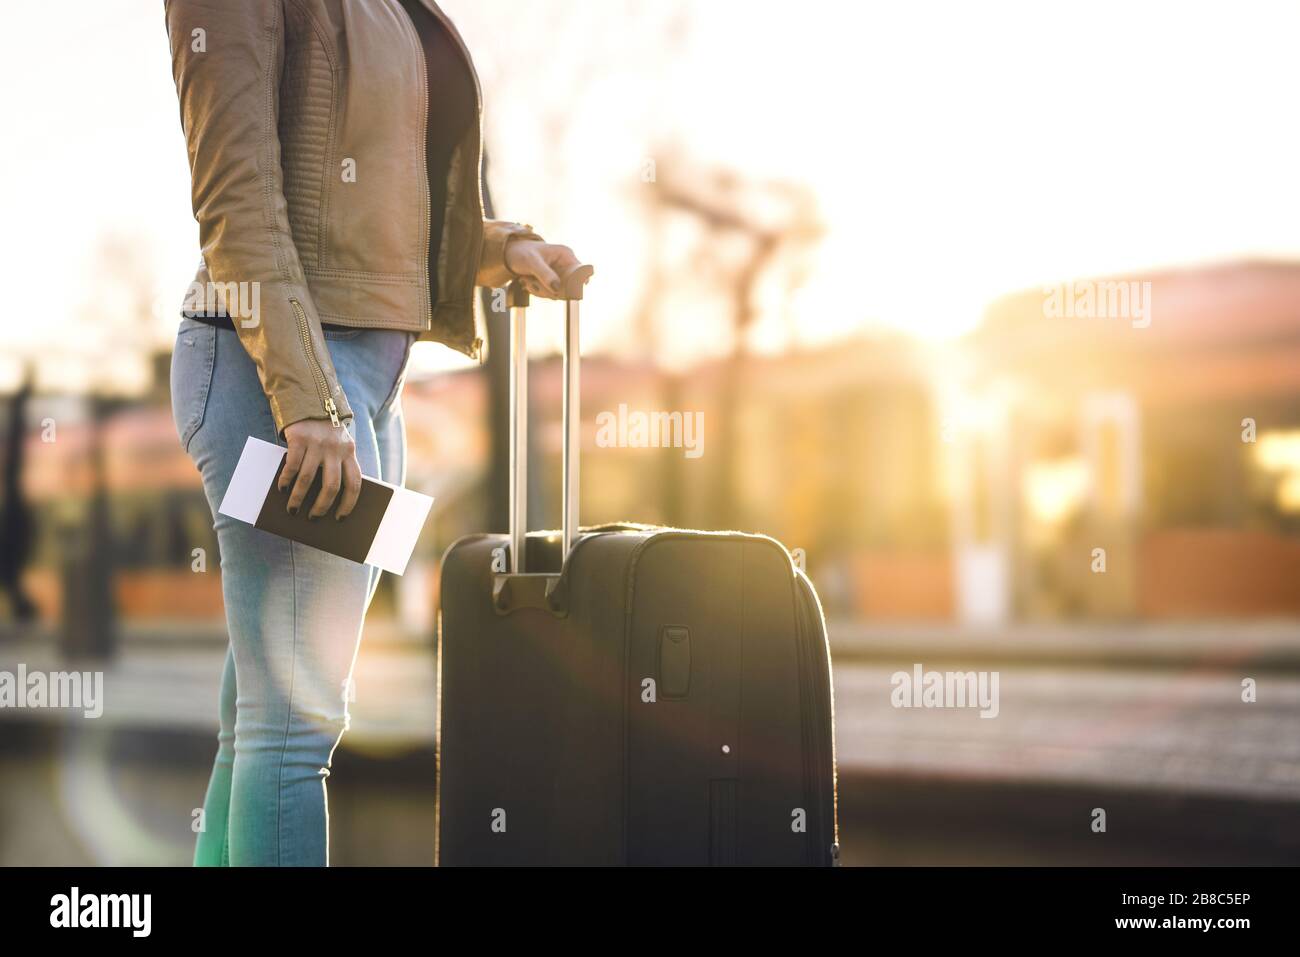 Train station at sunset. Woman standing in platform waiting and holding ticket and passport in hand. Person with suitcase and luggage. Stock Photo